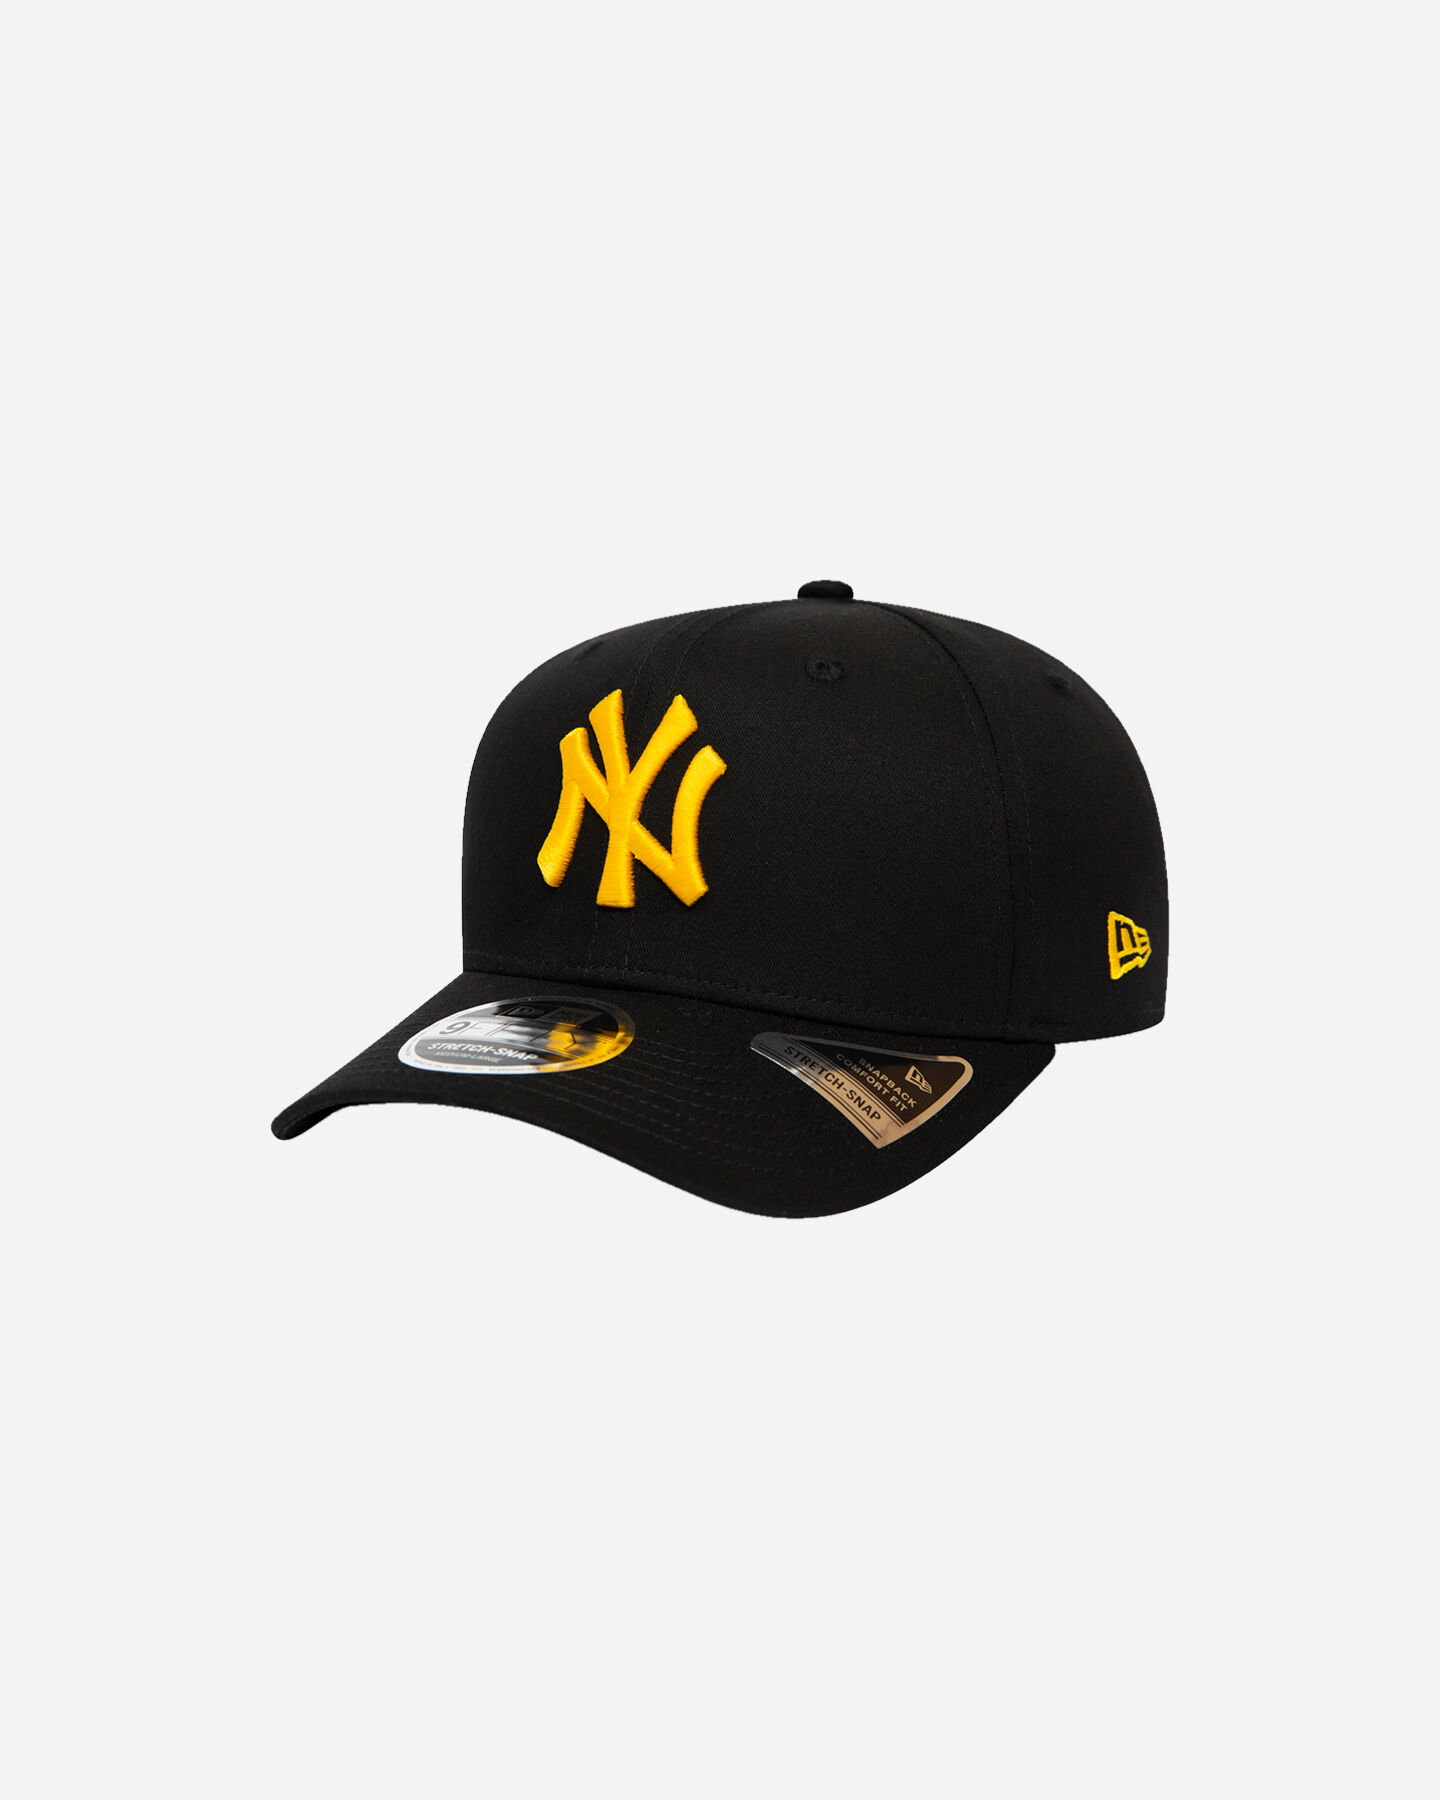  Cappellino NEW ERA NEW YORK YANKEES 9FIFTY STRETCH S5170061|001|SM scatto 0